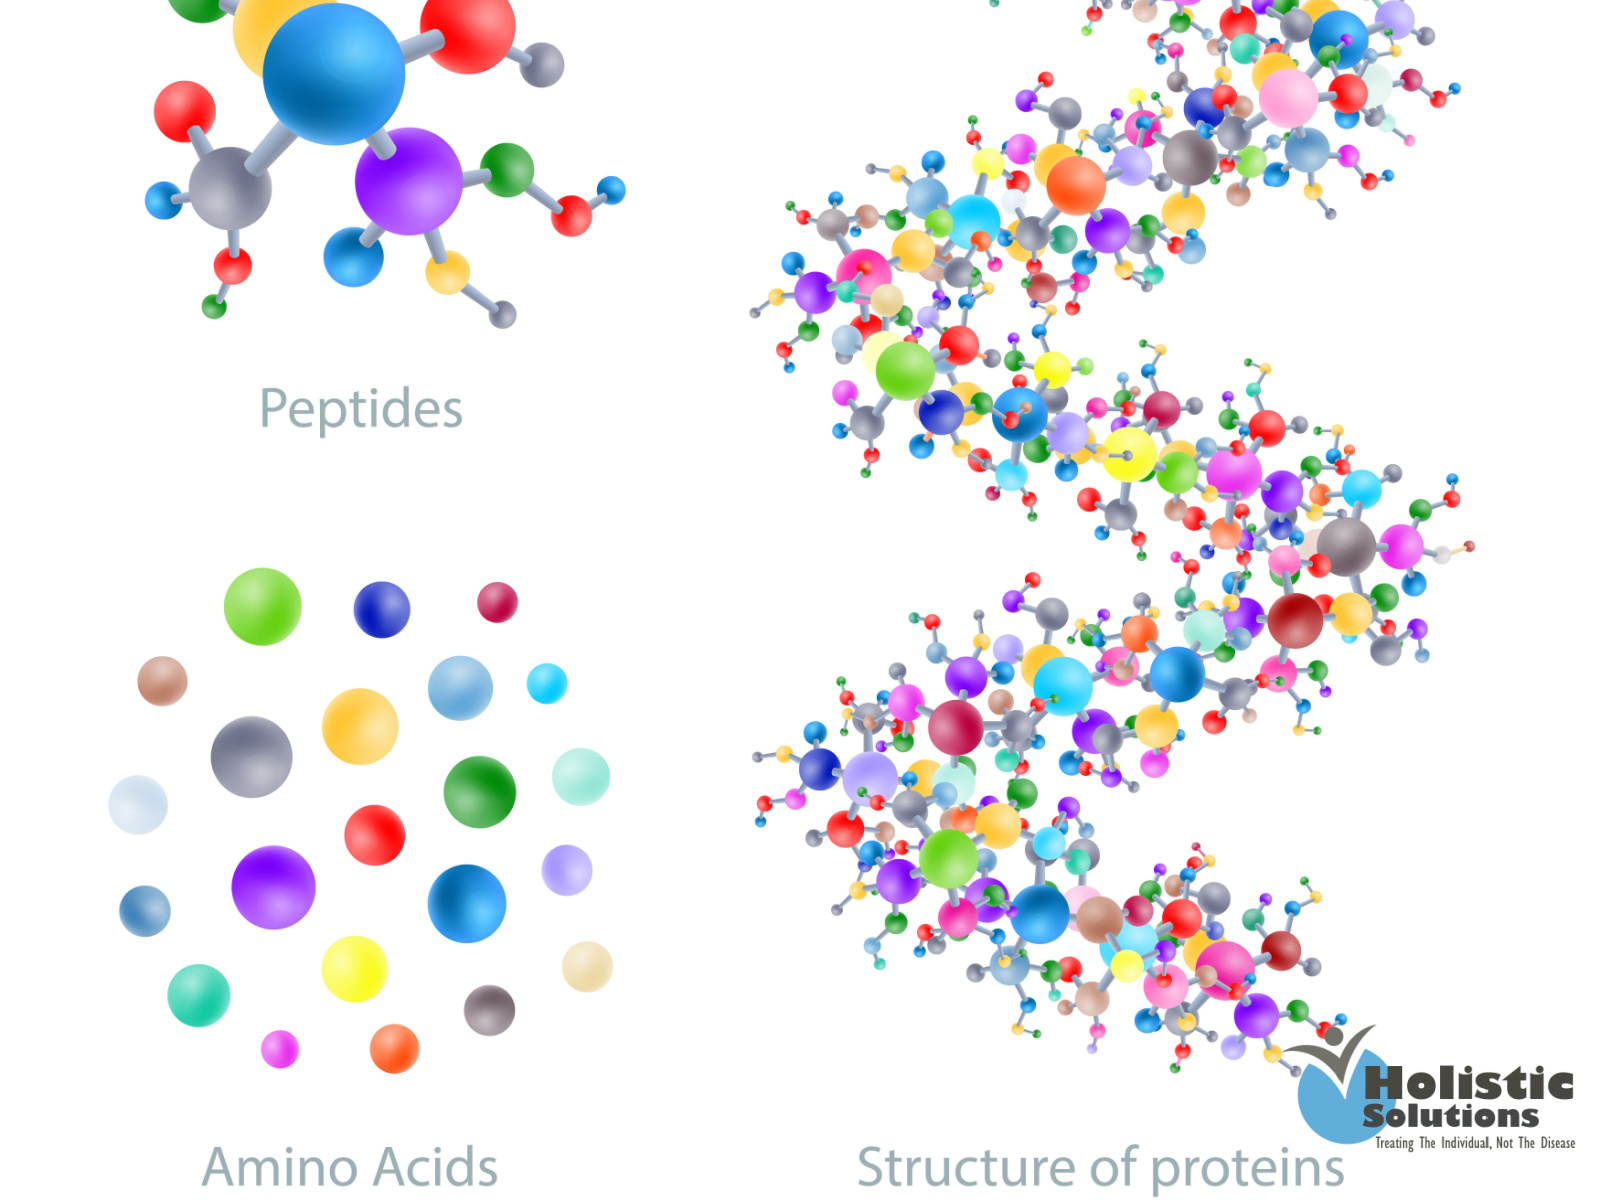 Are You Curious About Peptides For Healing Purposes?